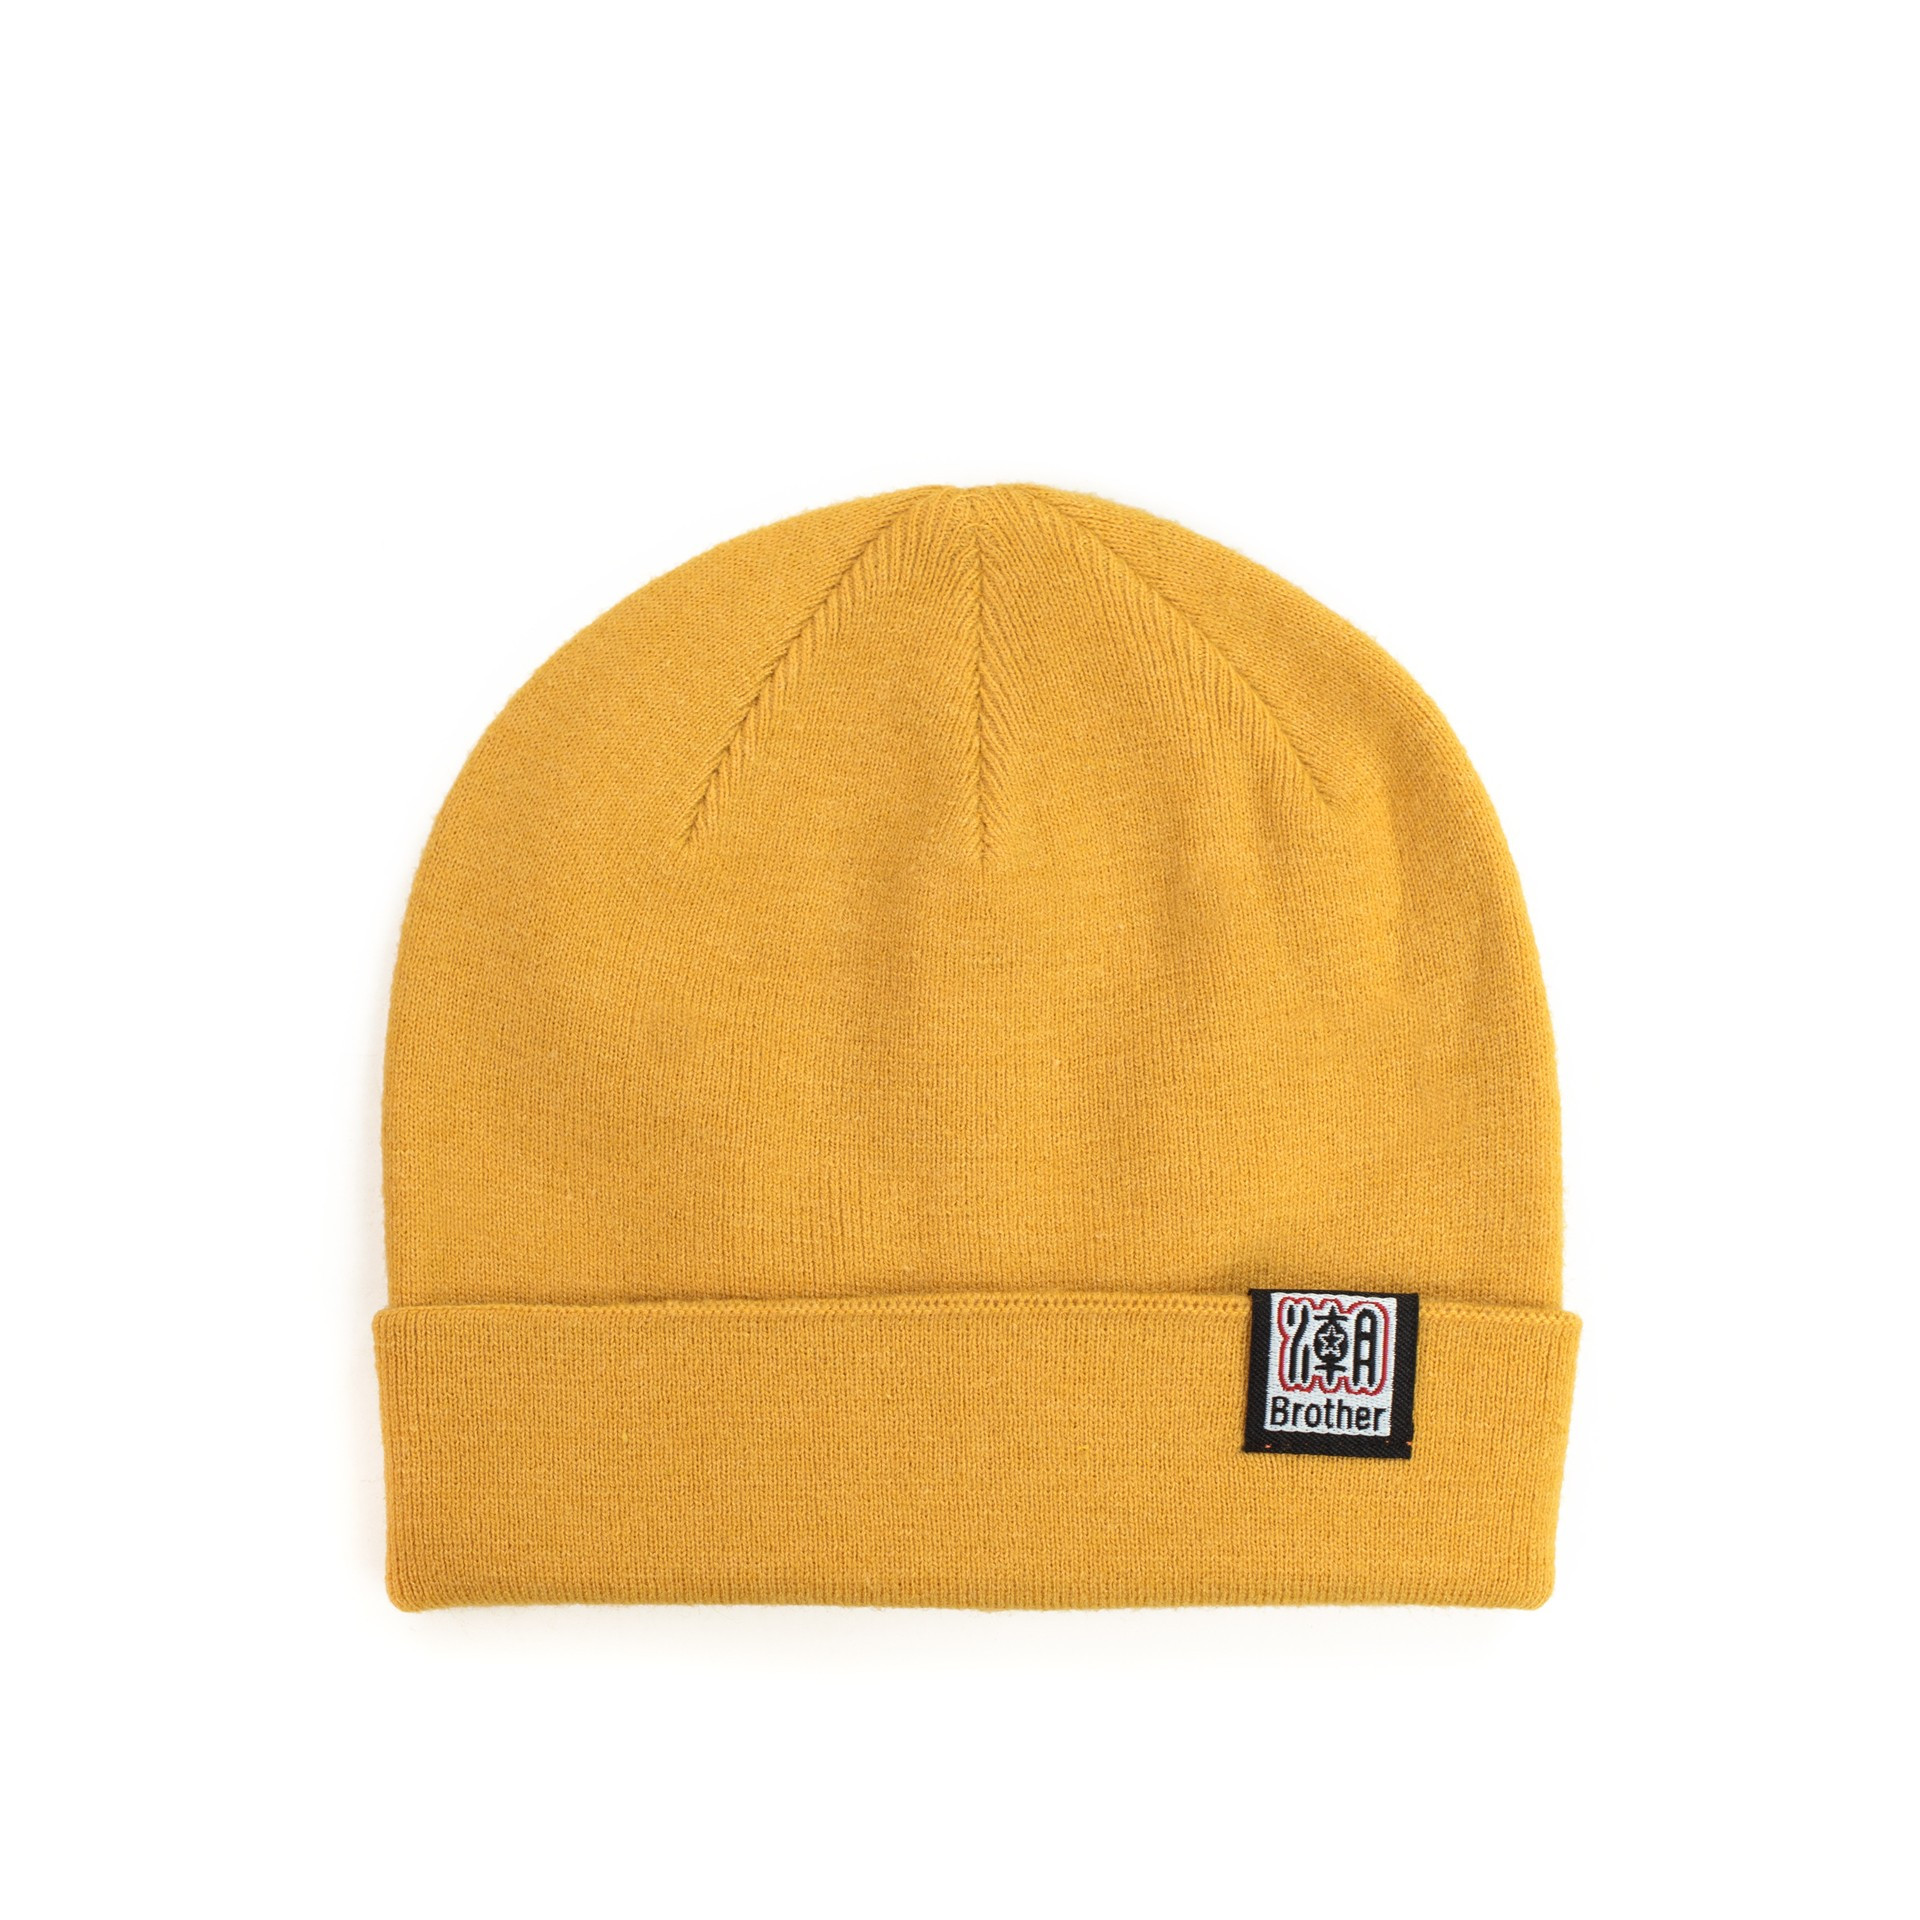 Art Of Polo Hat cz21322 Mustard OS